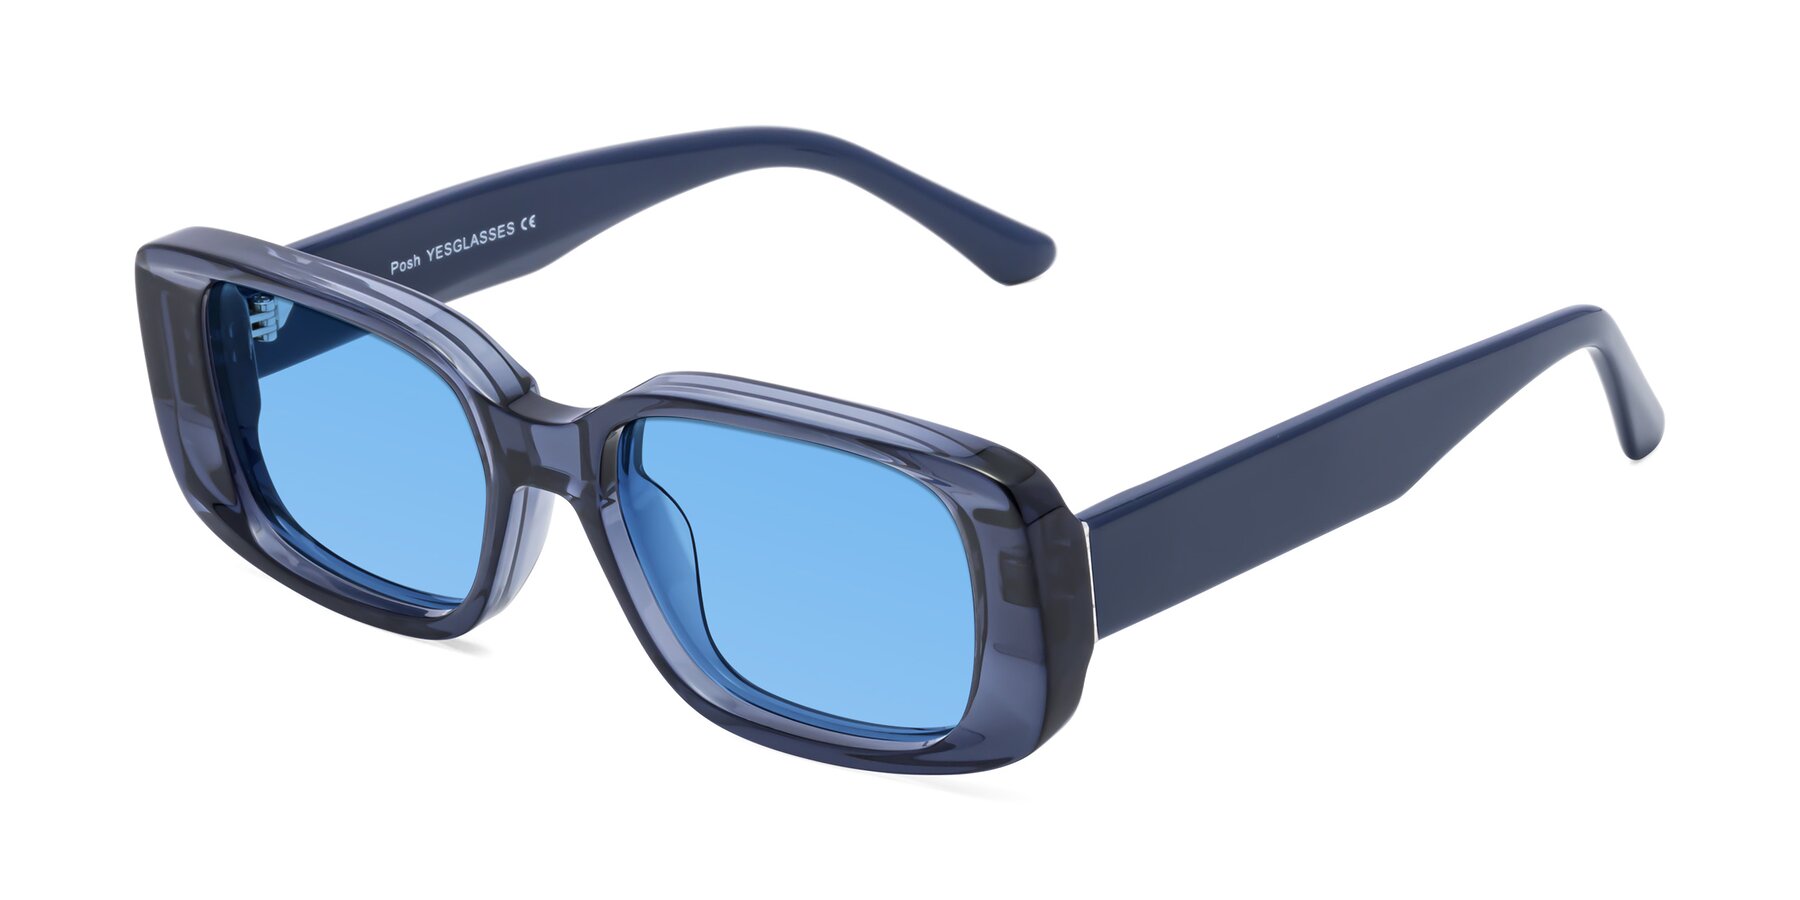 Angle of Posh in Translucent Blue with Medium Blue Tinted Lenses